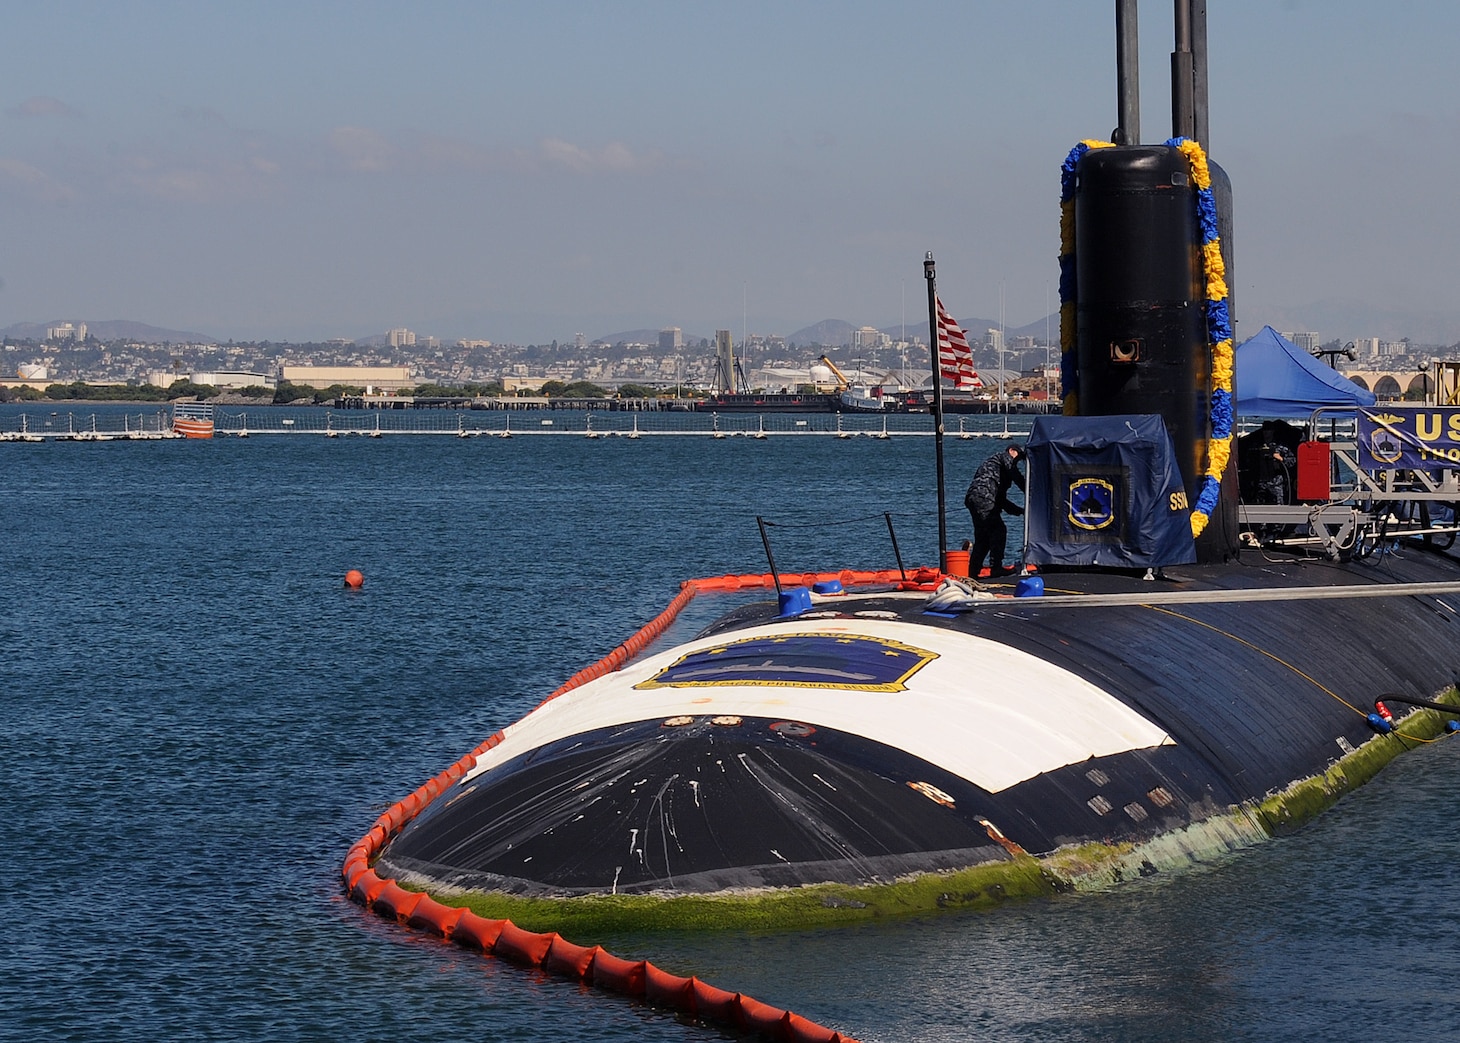 SAN DIEGO (Oct. 13, 2015) The Los Angeles-class attack submarine USS Hampton (SSN 767) is pierside after returning home from an extended deployment. Hampton deployed to the U.S. 7th Fleet area of responsibility where the crew executed the Chief of Naval Operations' Maritime Strategy in supporting national security interests and maritime security operations. (U.S. Navy photo by Mass Communication Specialist 2nd Class Kyle Carlstrom/Released)                